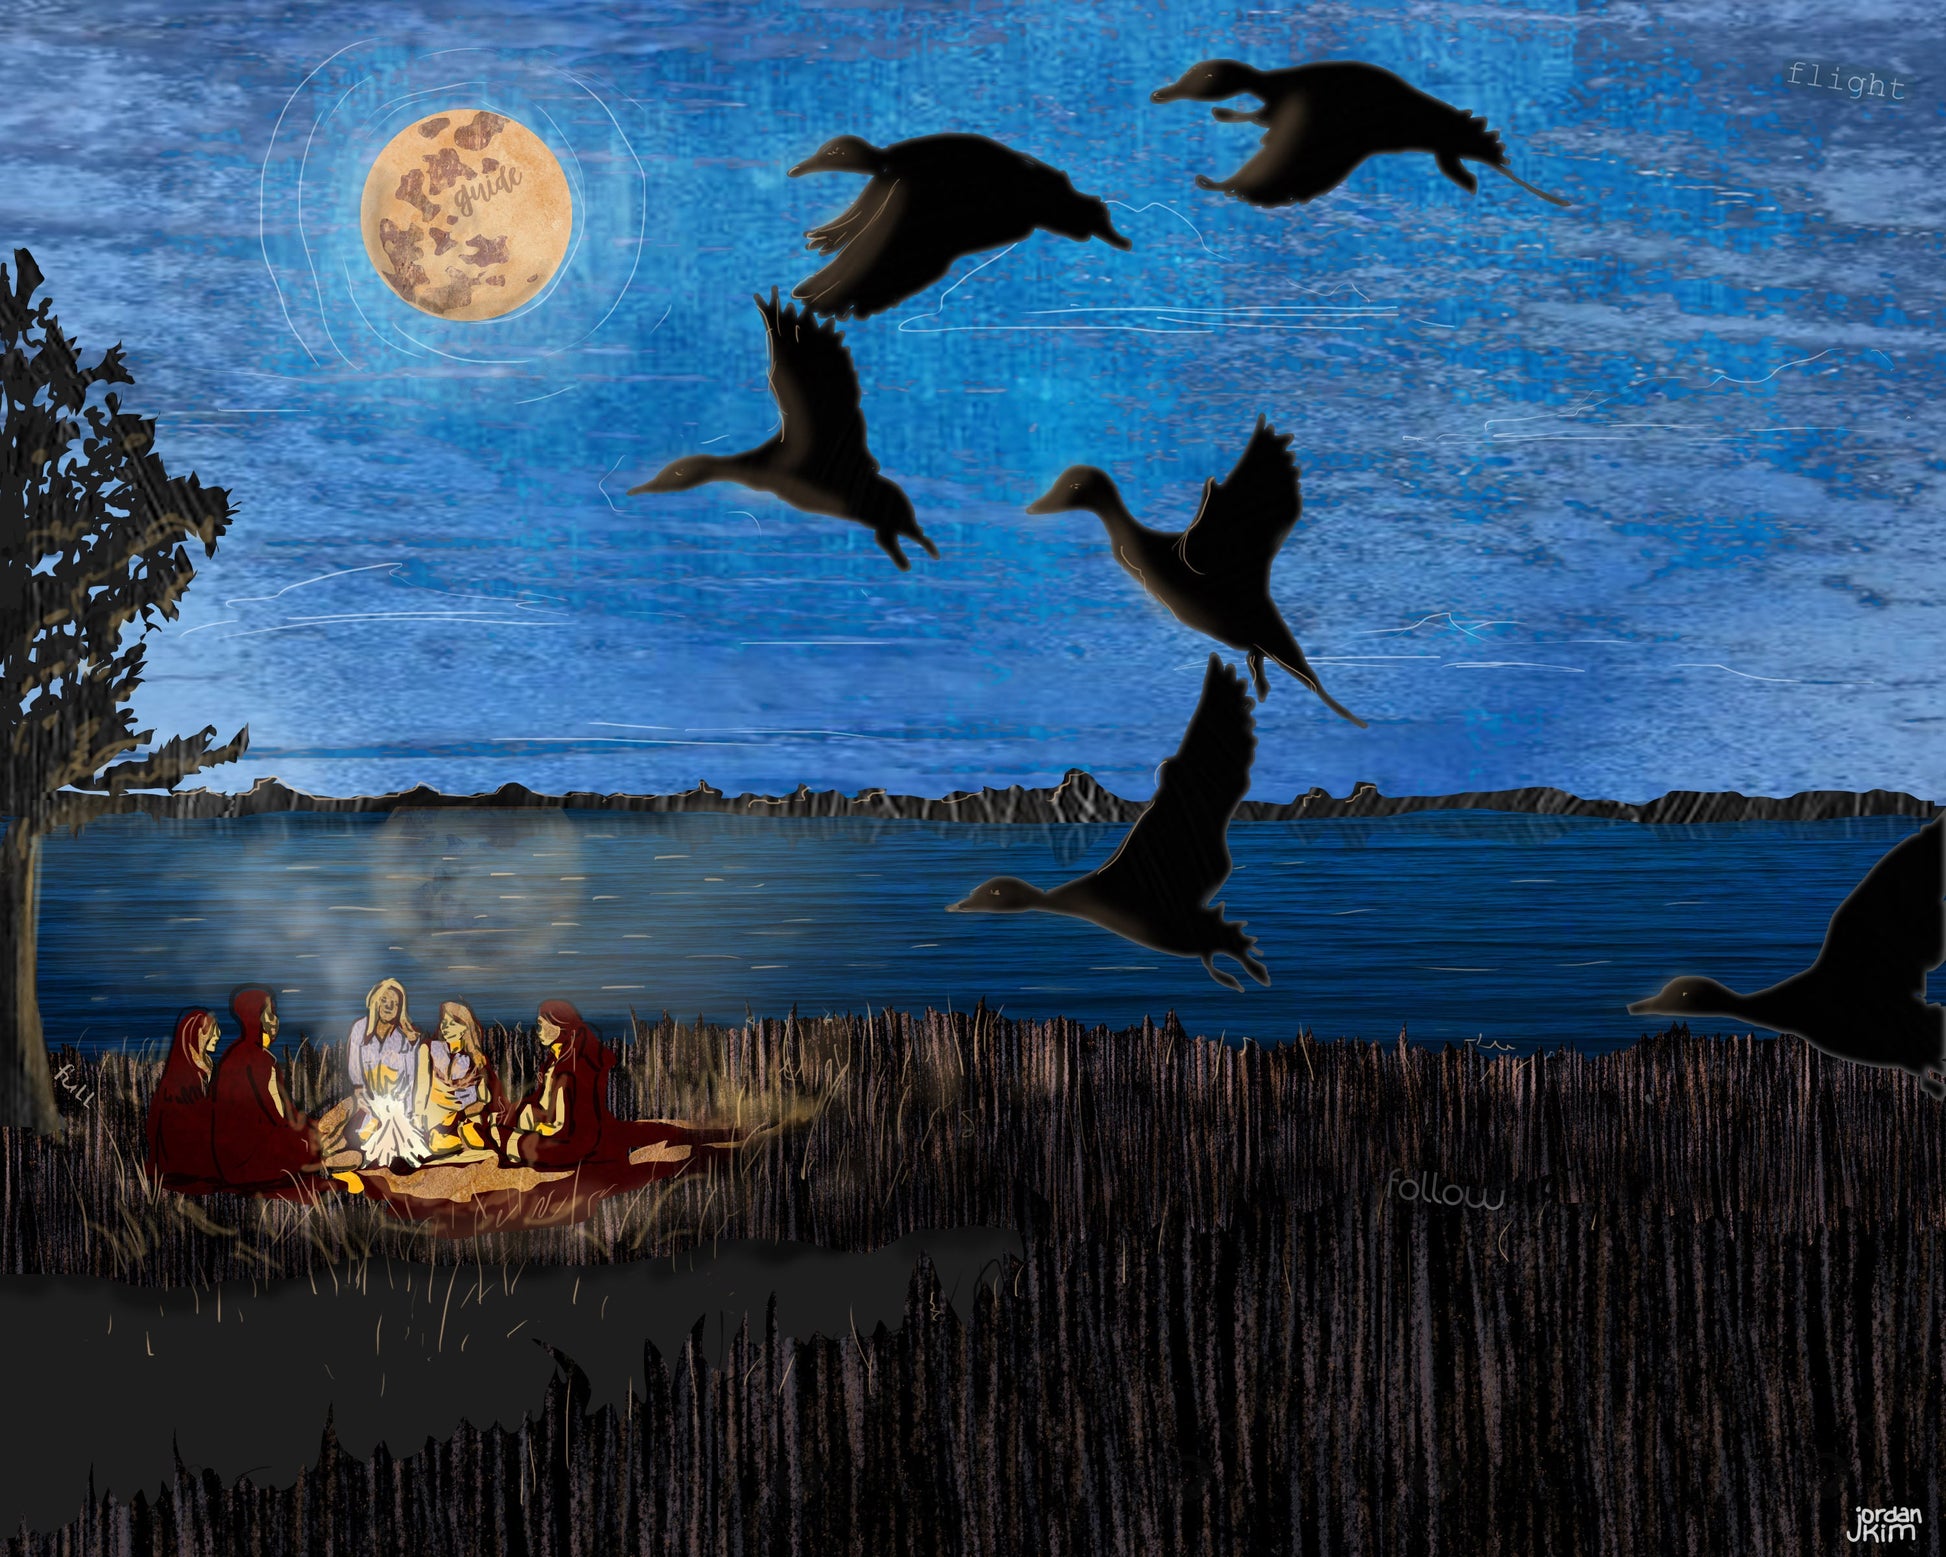 Greeting Card of mixed media collage of Blue-Winged Teal ducks taking off in the dusk over a group of friends by a campfire - Blank Inside